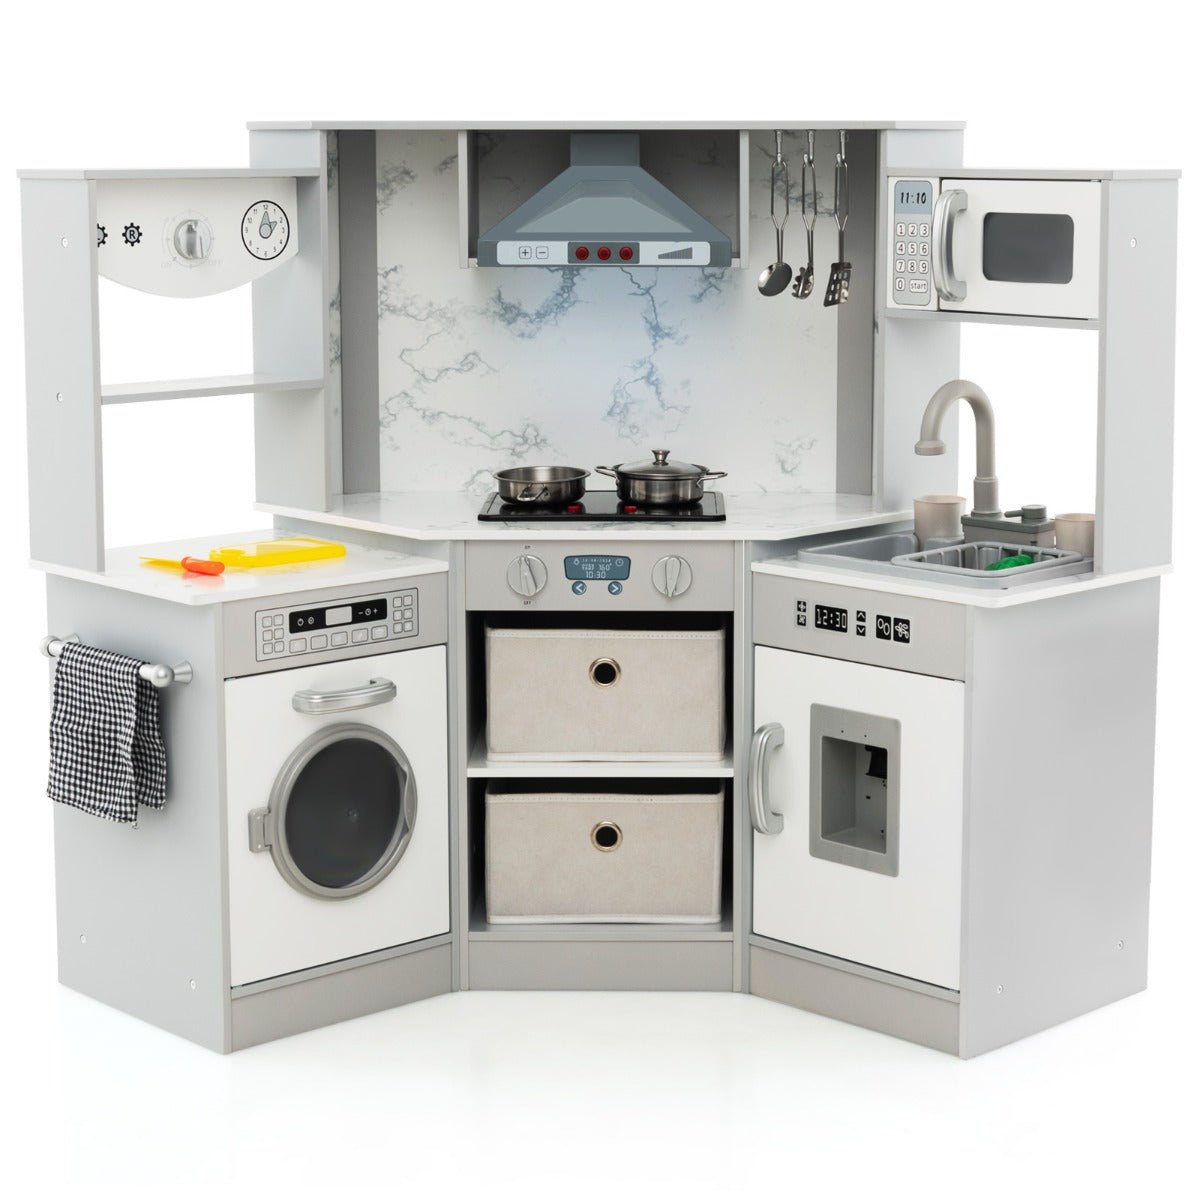 Educational Wooden Kitchen with Sound Features